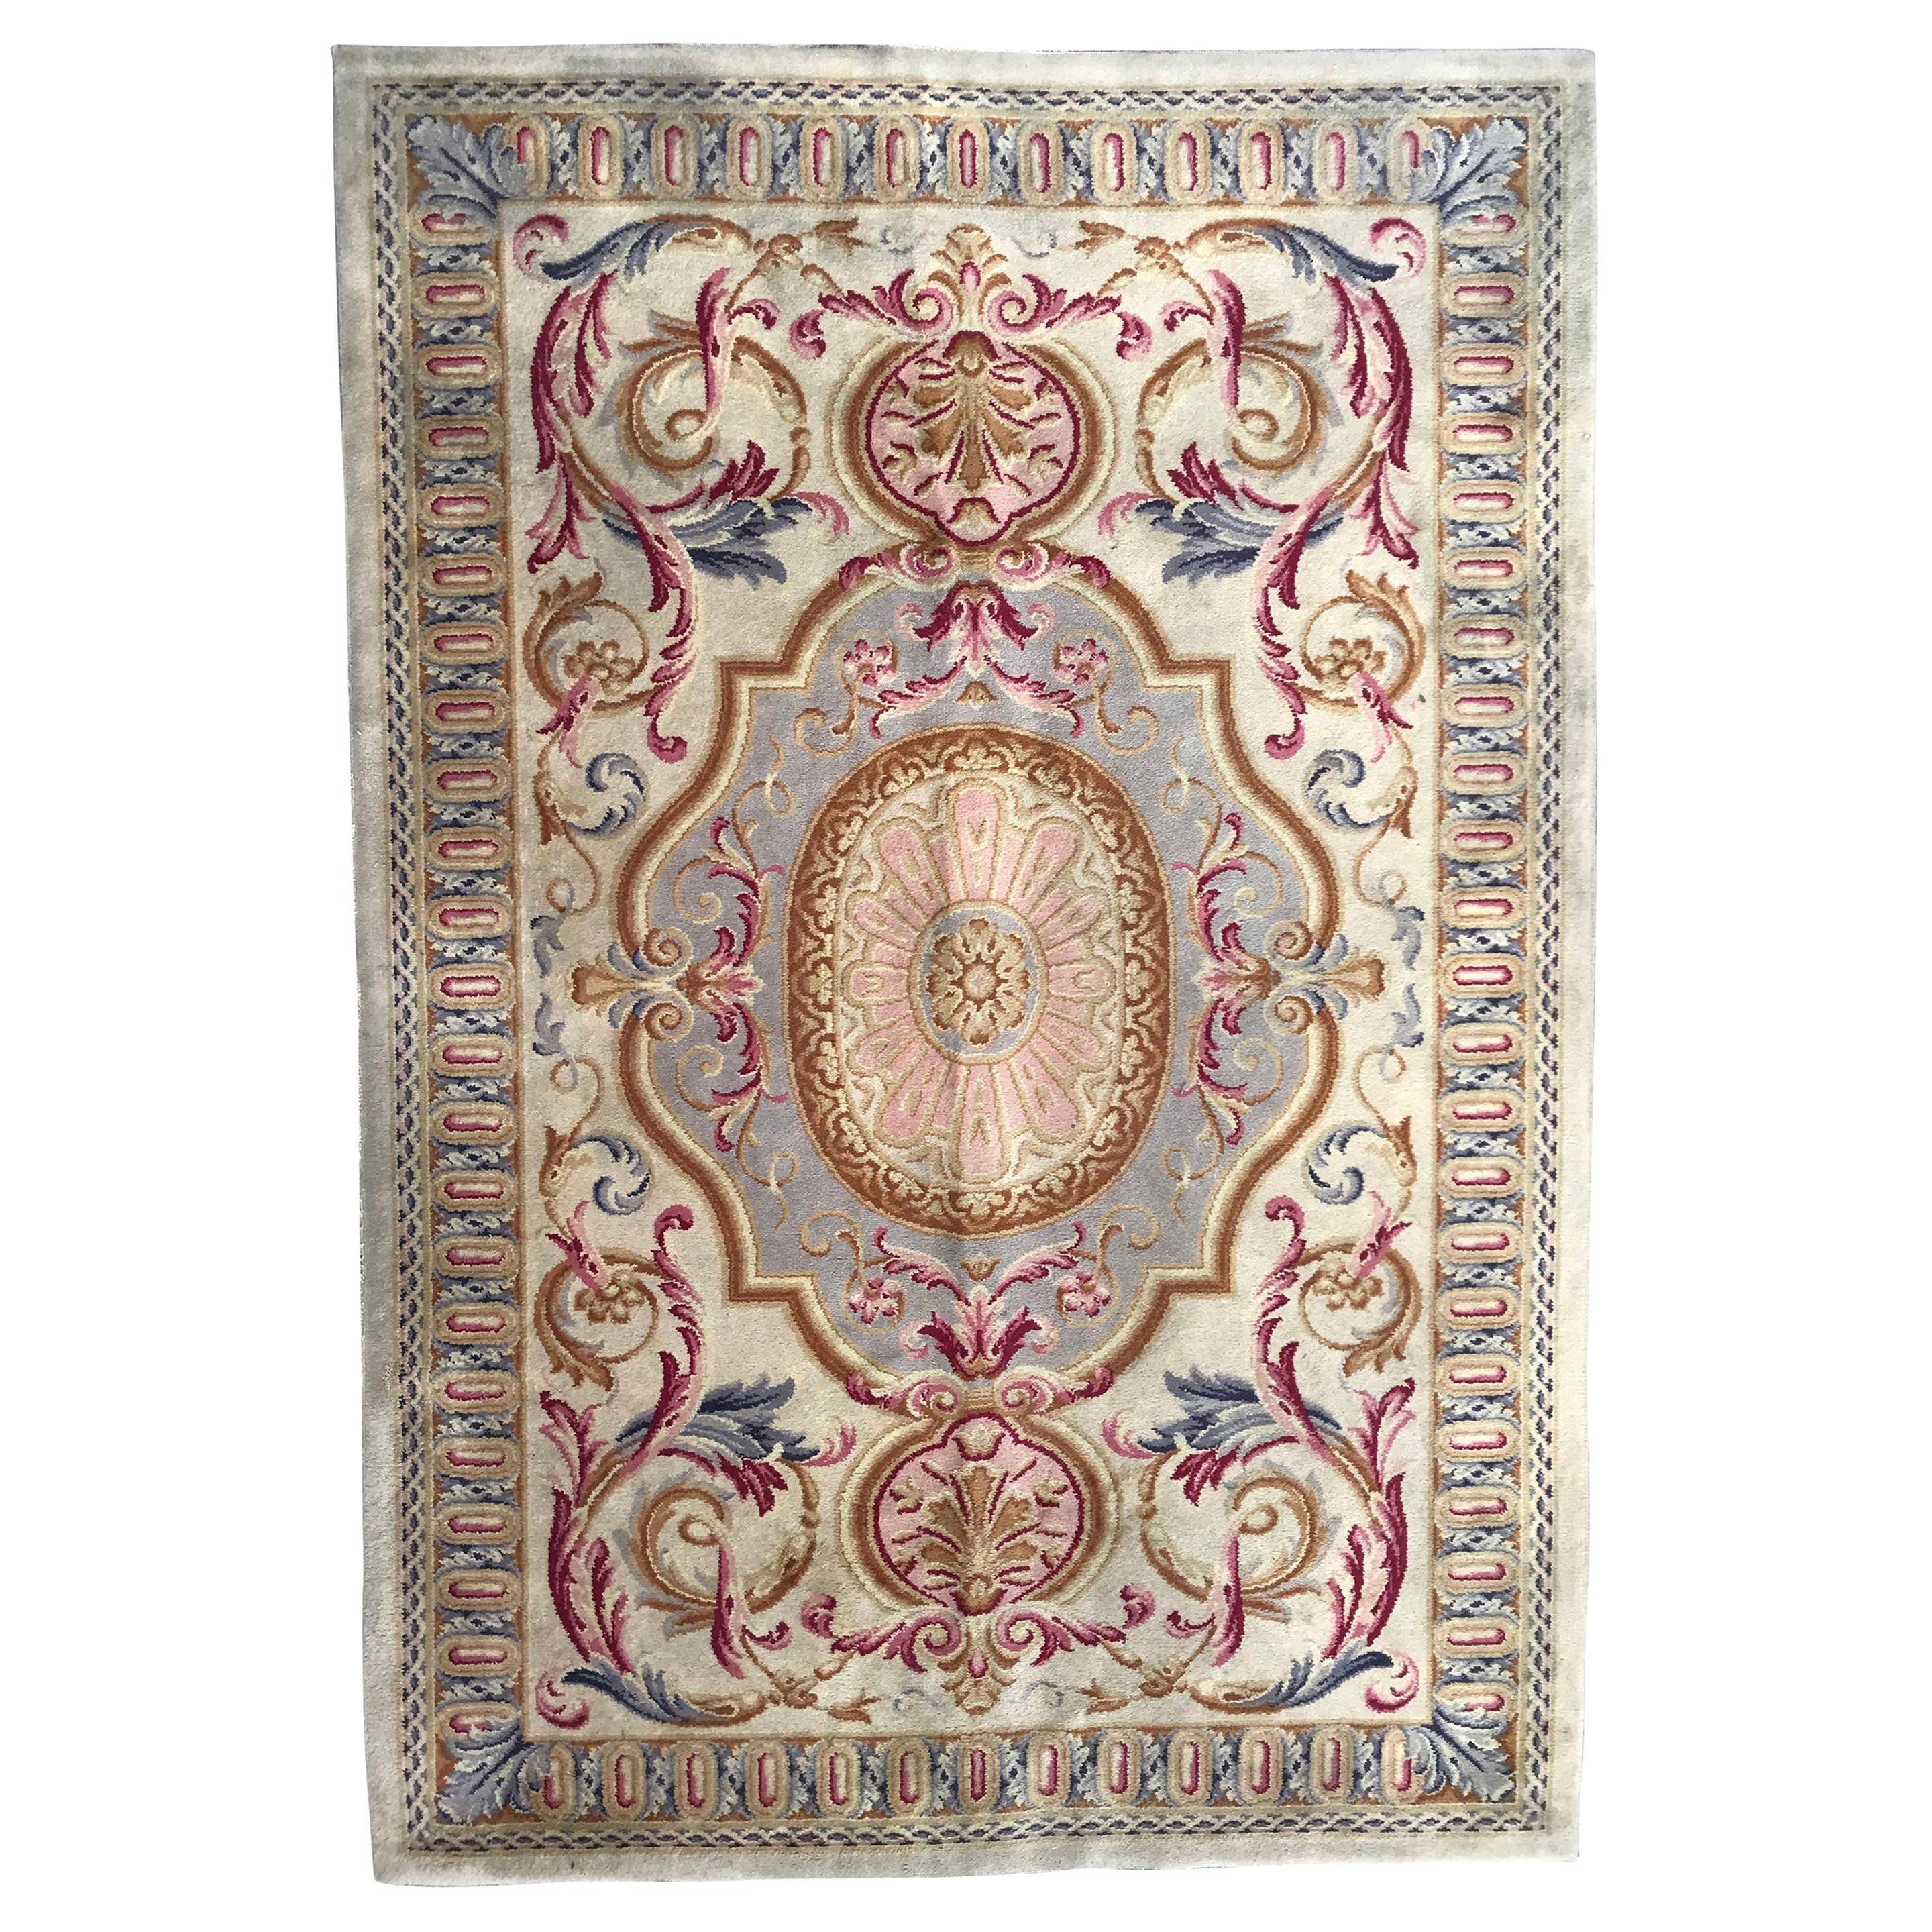 Bobyrug's Midcentury Knotted Aubusson Savonnerie Design-Teppich